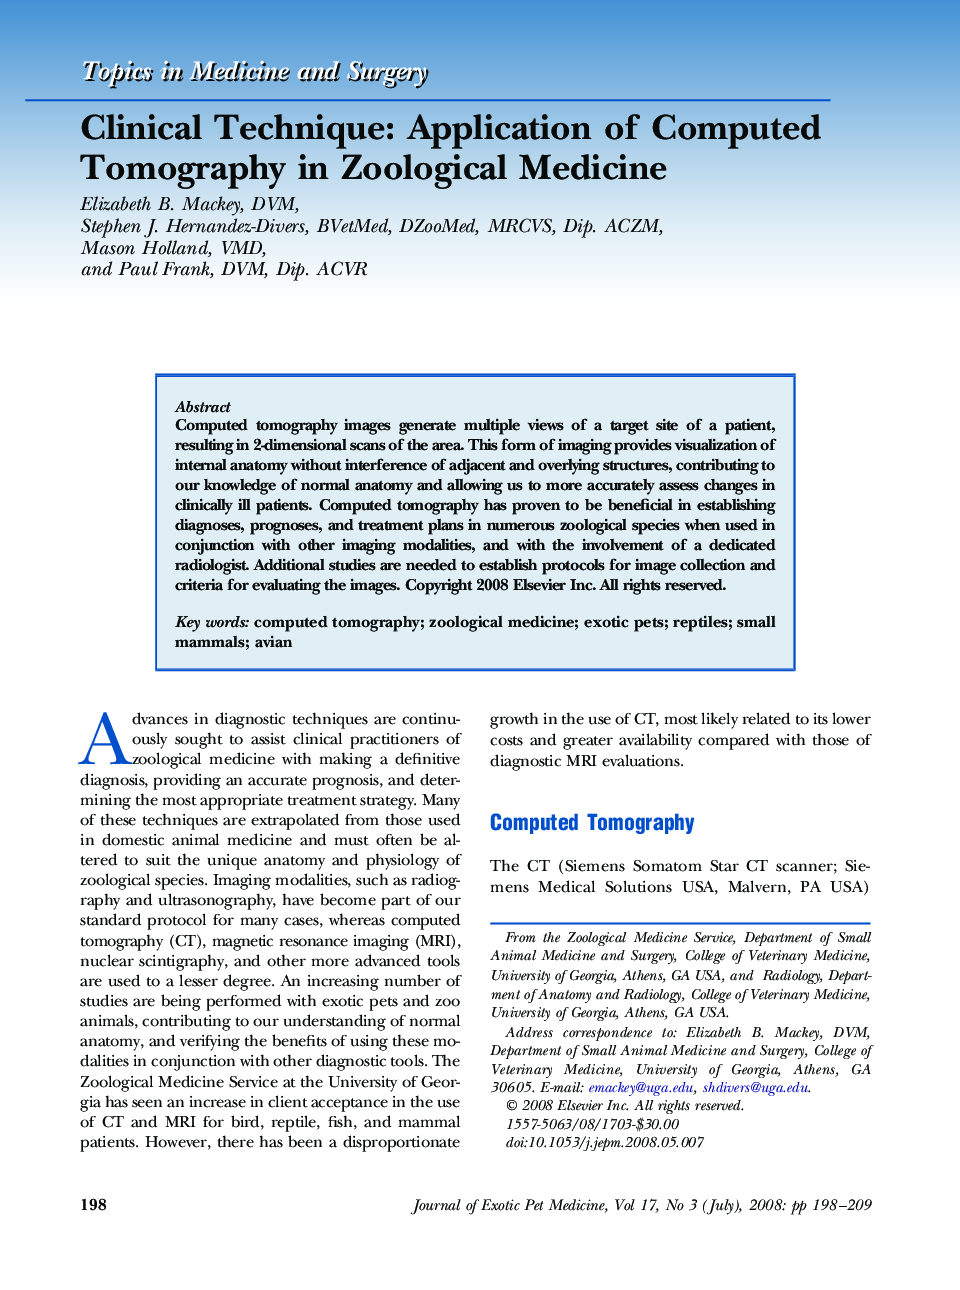 Clinical Technique: Application of Computed Tomography in Zoological Medicine